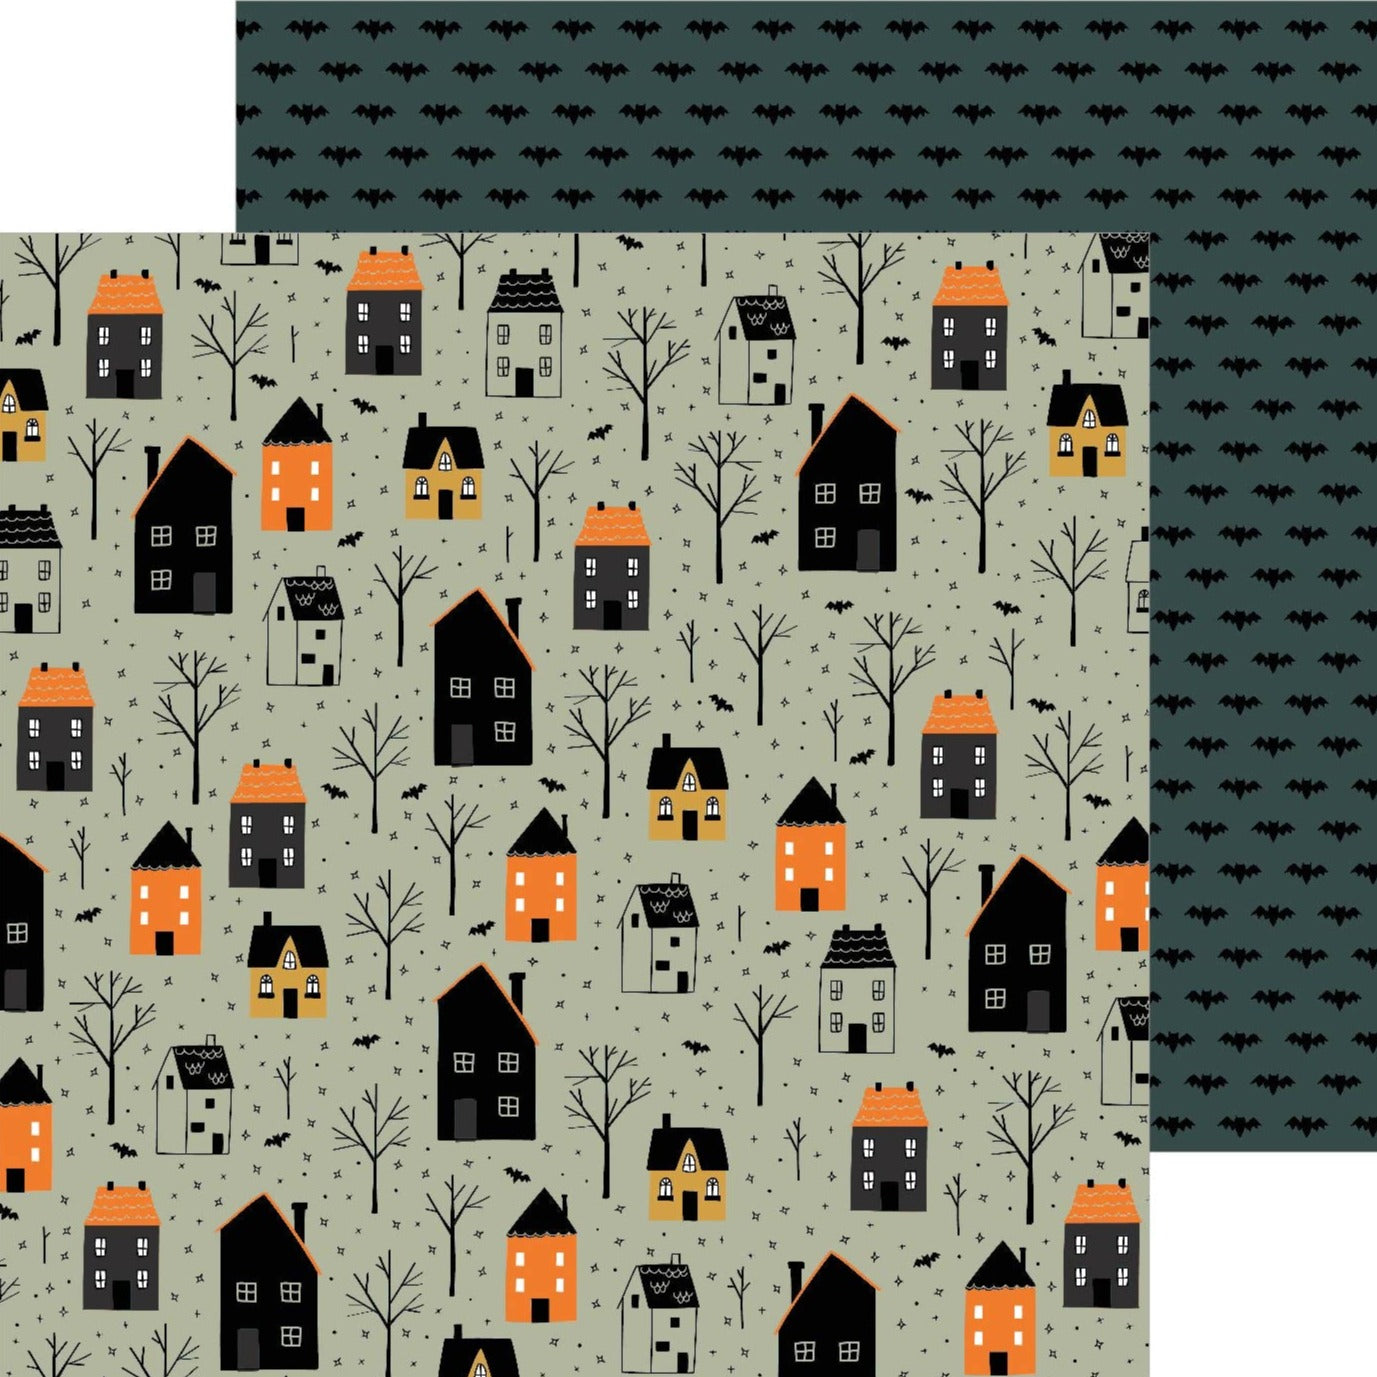 Multi-colored (Side A - Halloween houses in orange, black, and yellow with spooky trees and bats on a gray background, Side B - rows of small black bats on a dark teal background)